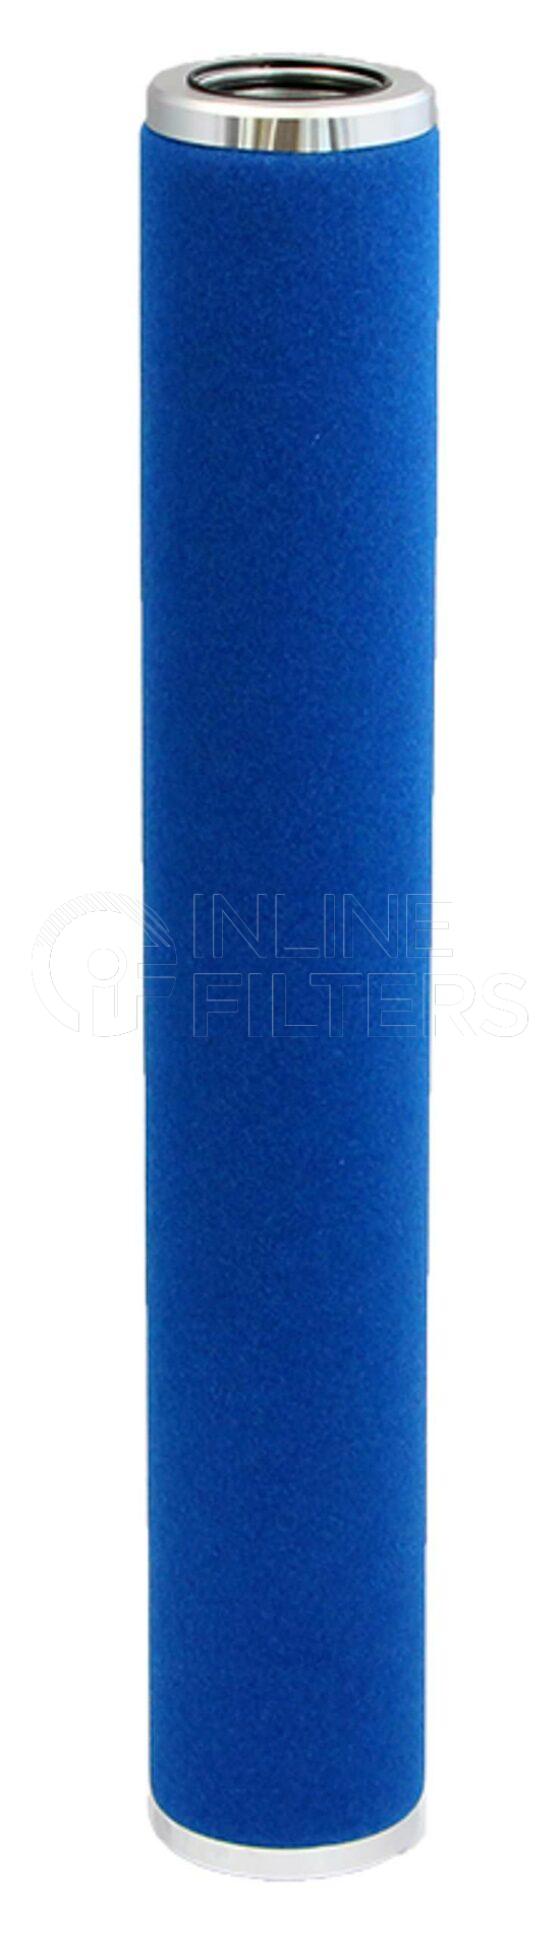 Inline FA14050. Air Filter Product – Compressed Air – Cartridge Product Air filter product